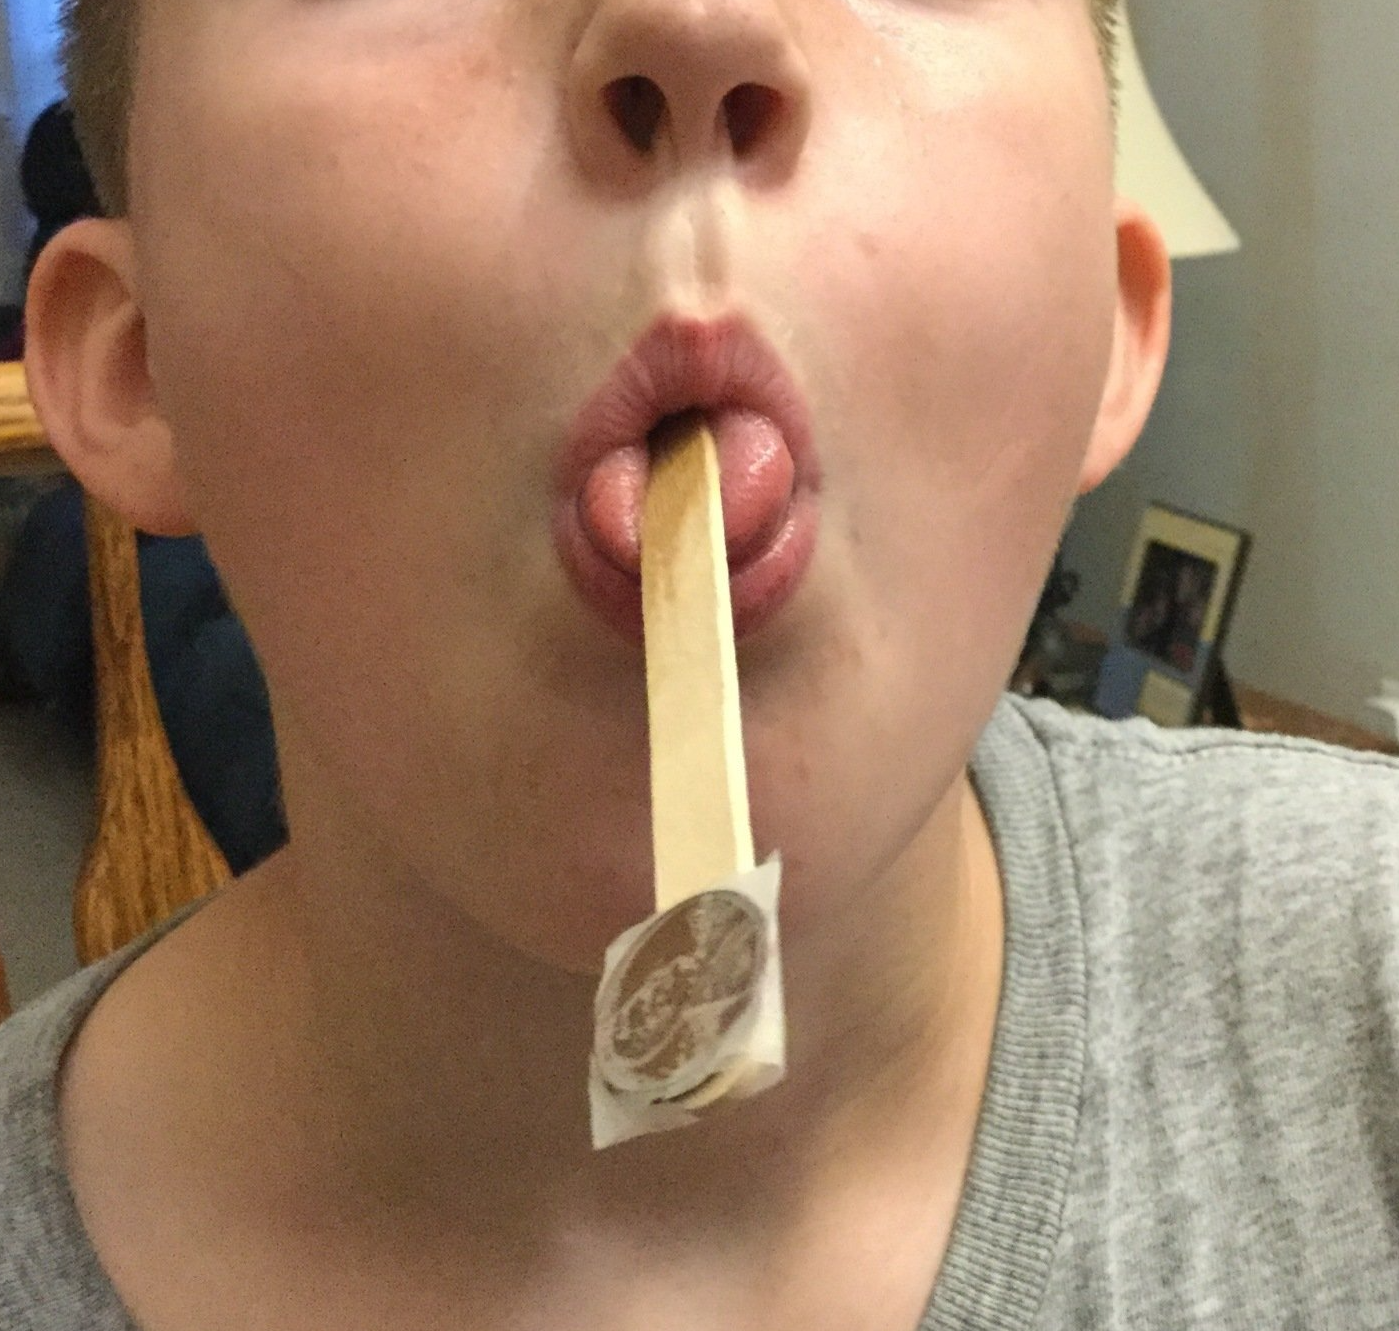 young boy mouth with popsicle stick with a penny taped to the end